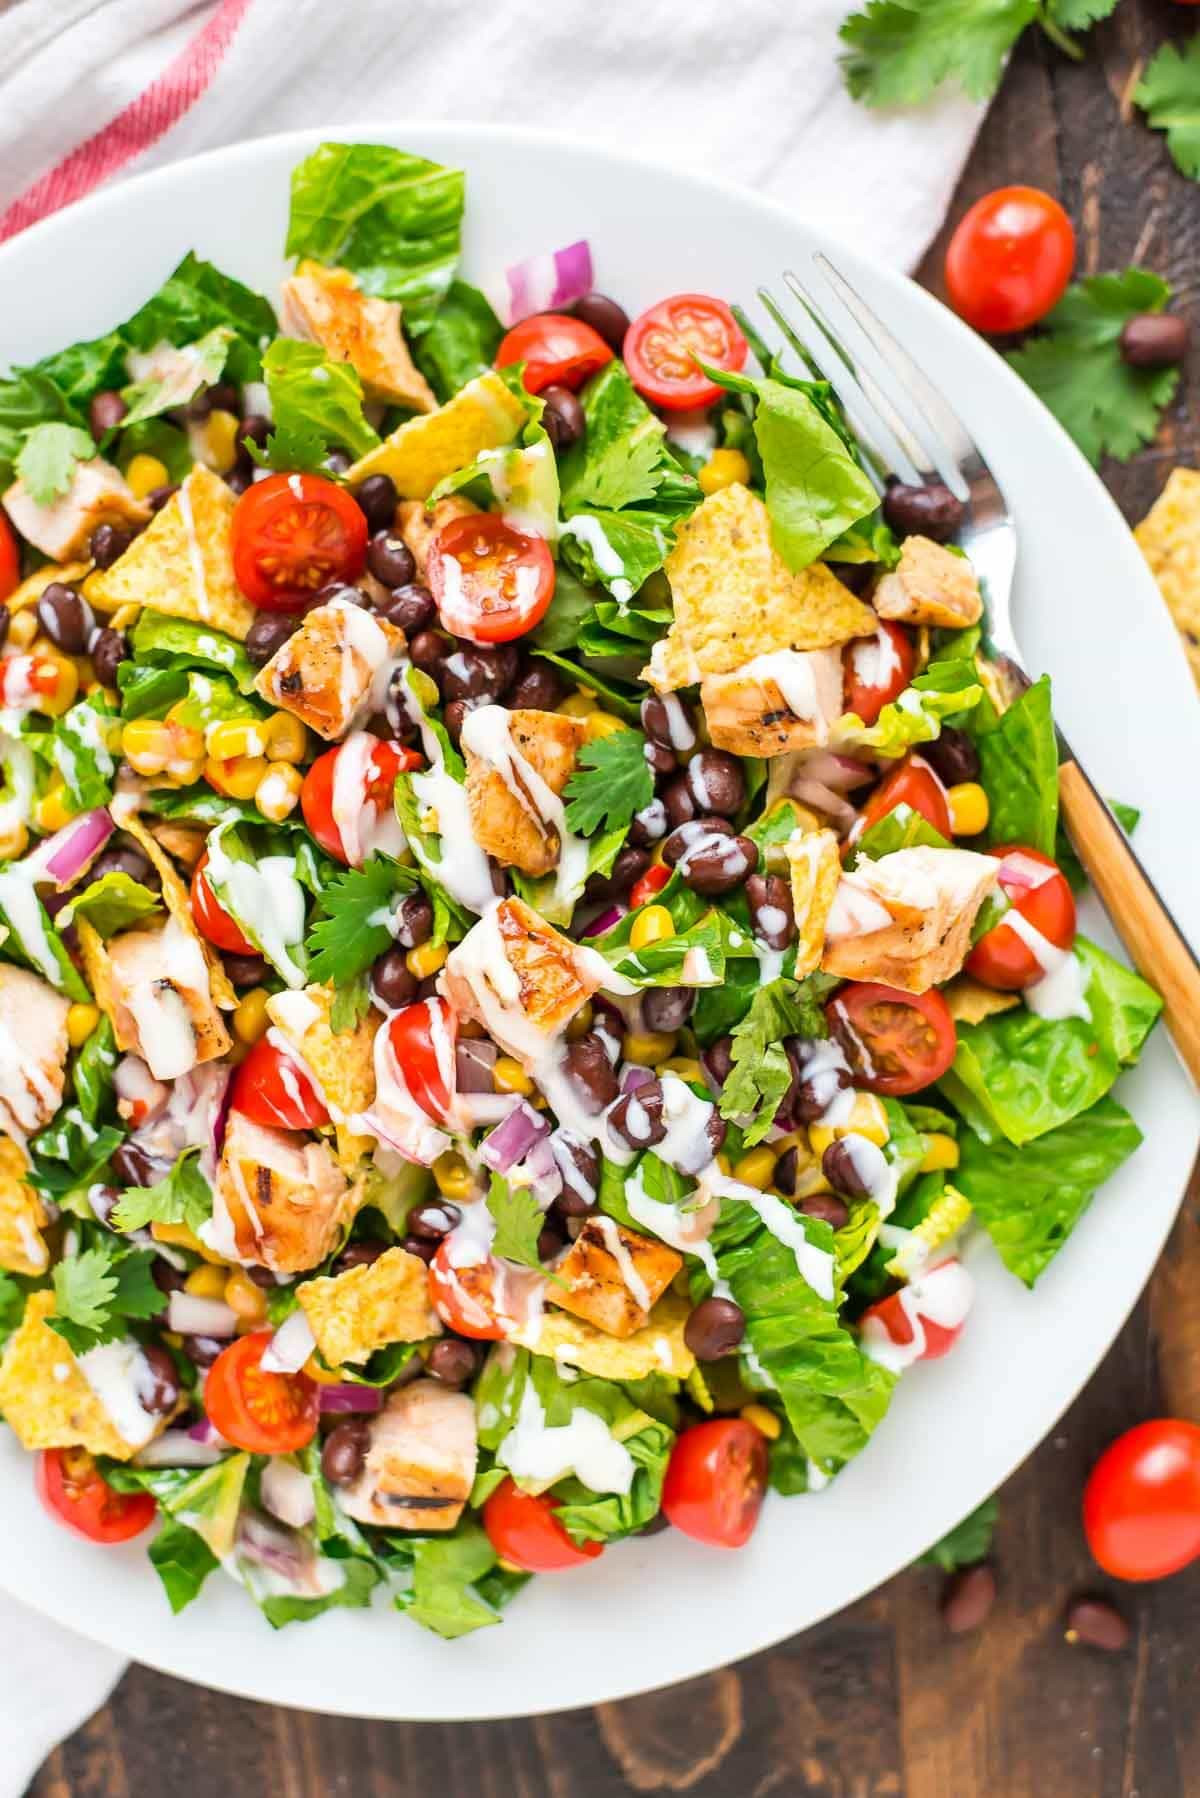 Salads Dressing Recipes Healthy
 BBQ Chicken Salad with Creamy Ranch